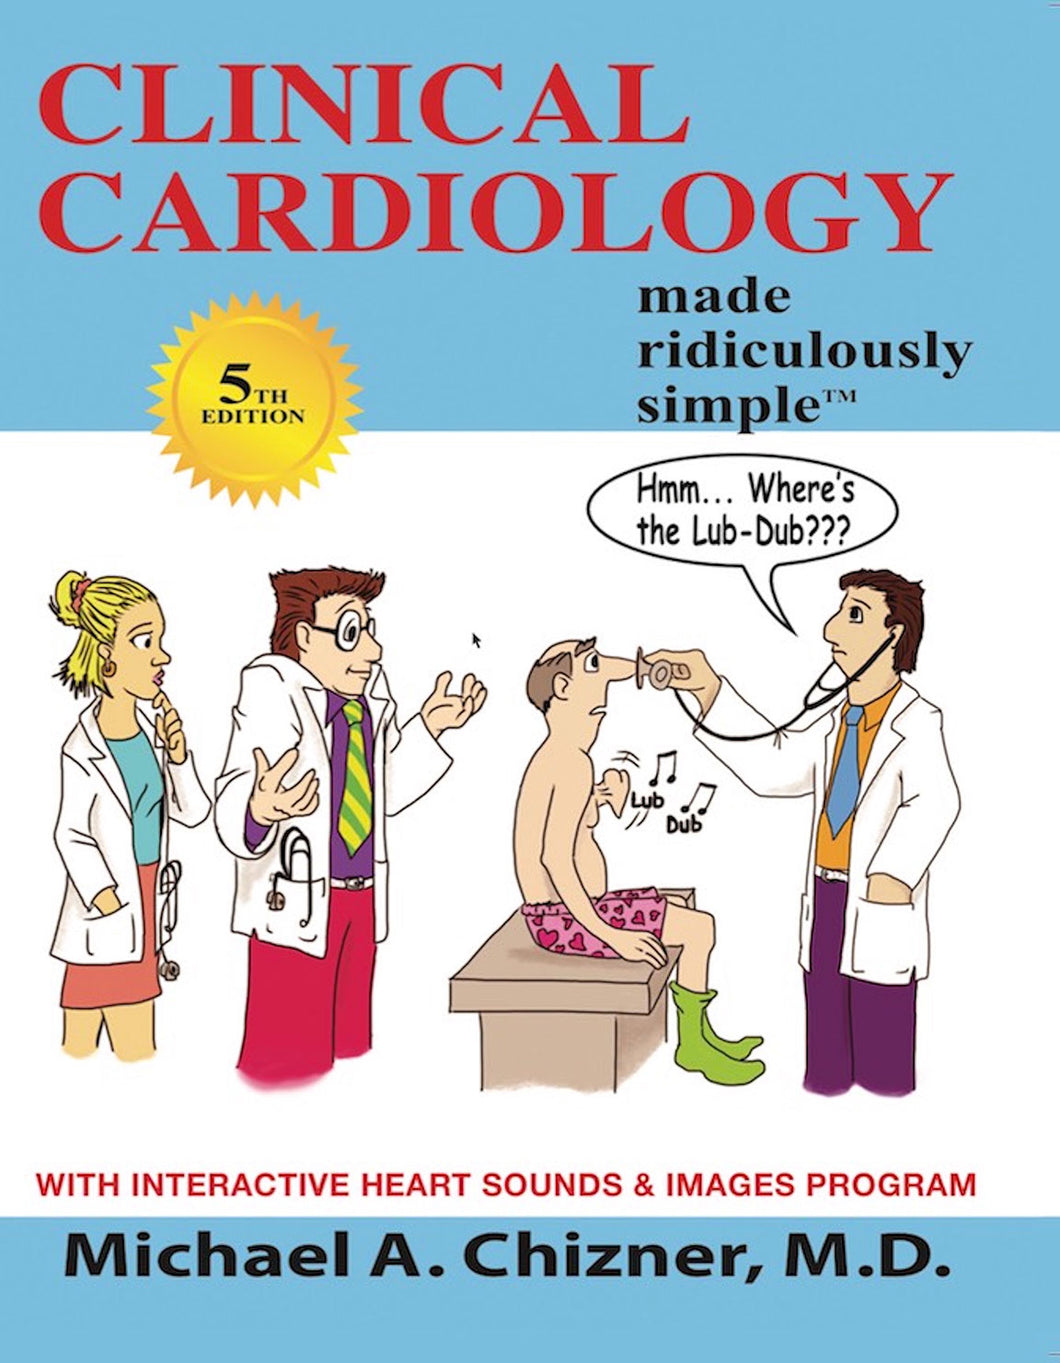 Clinical Cardiology Made Ridiculously Simple, 5th ed.